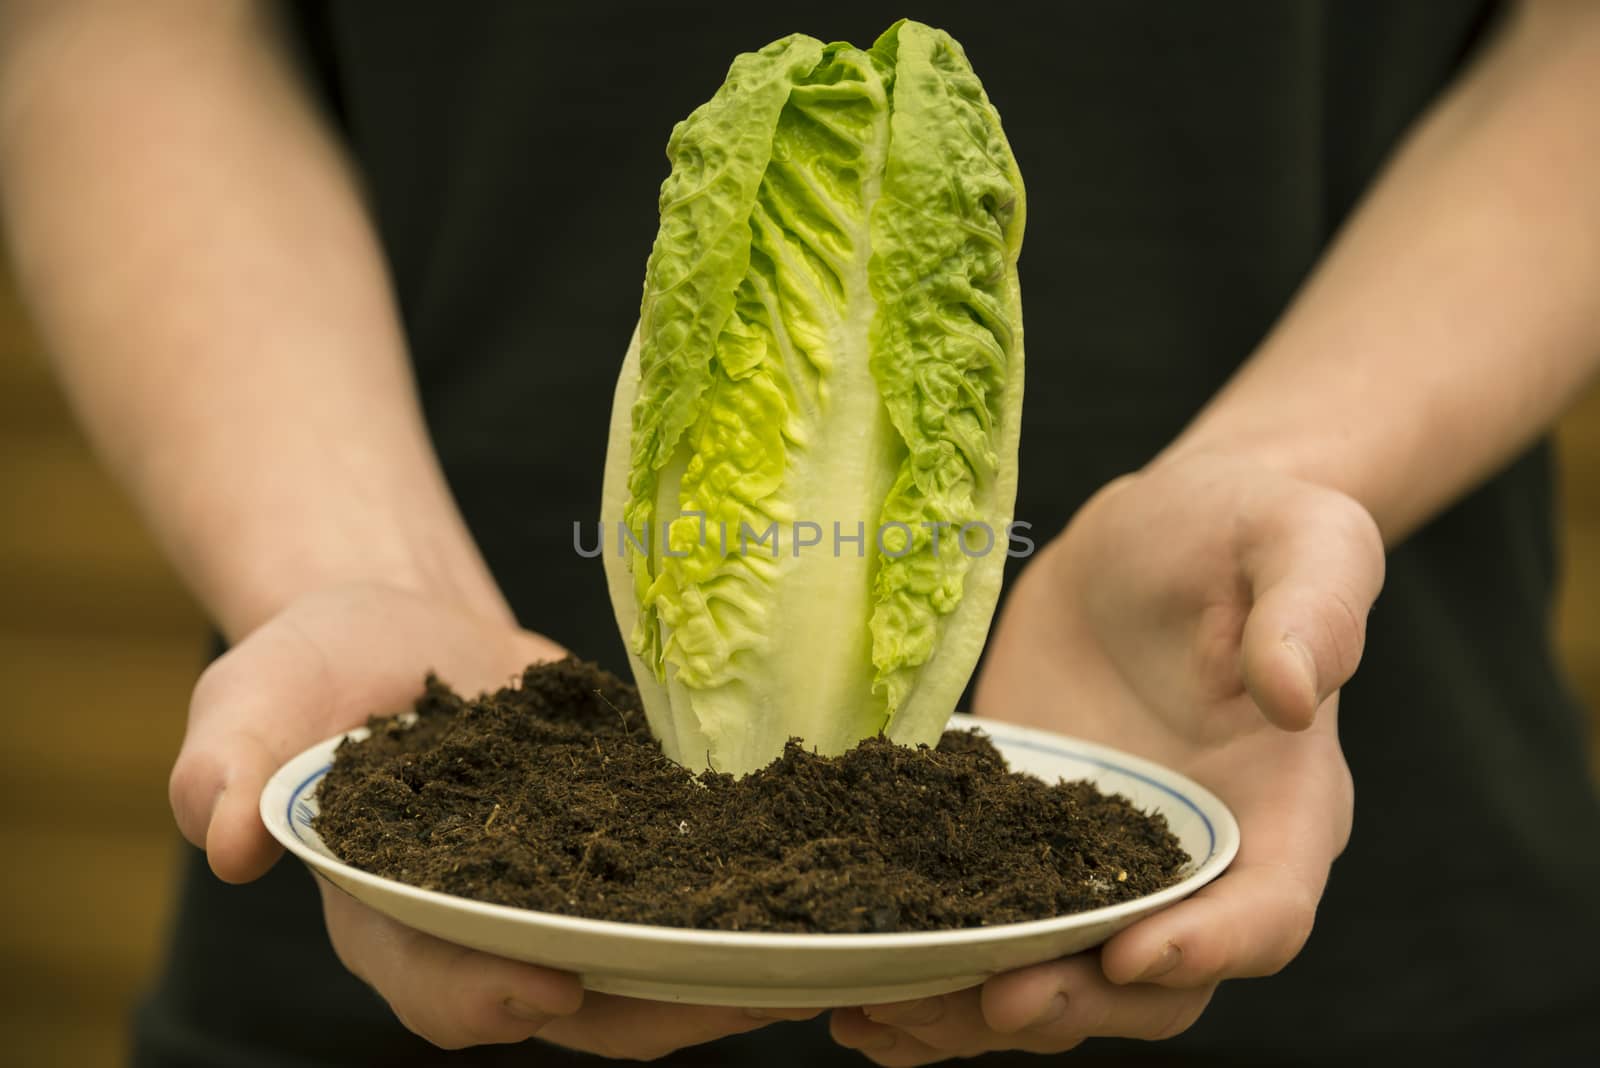 A pair of hands is holding a plate with soil and salad